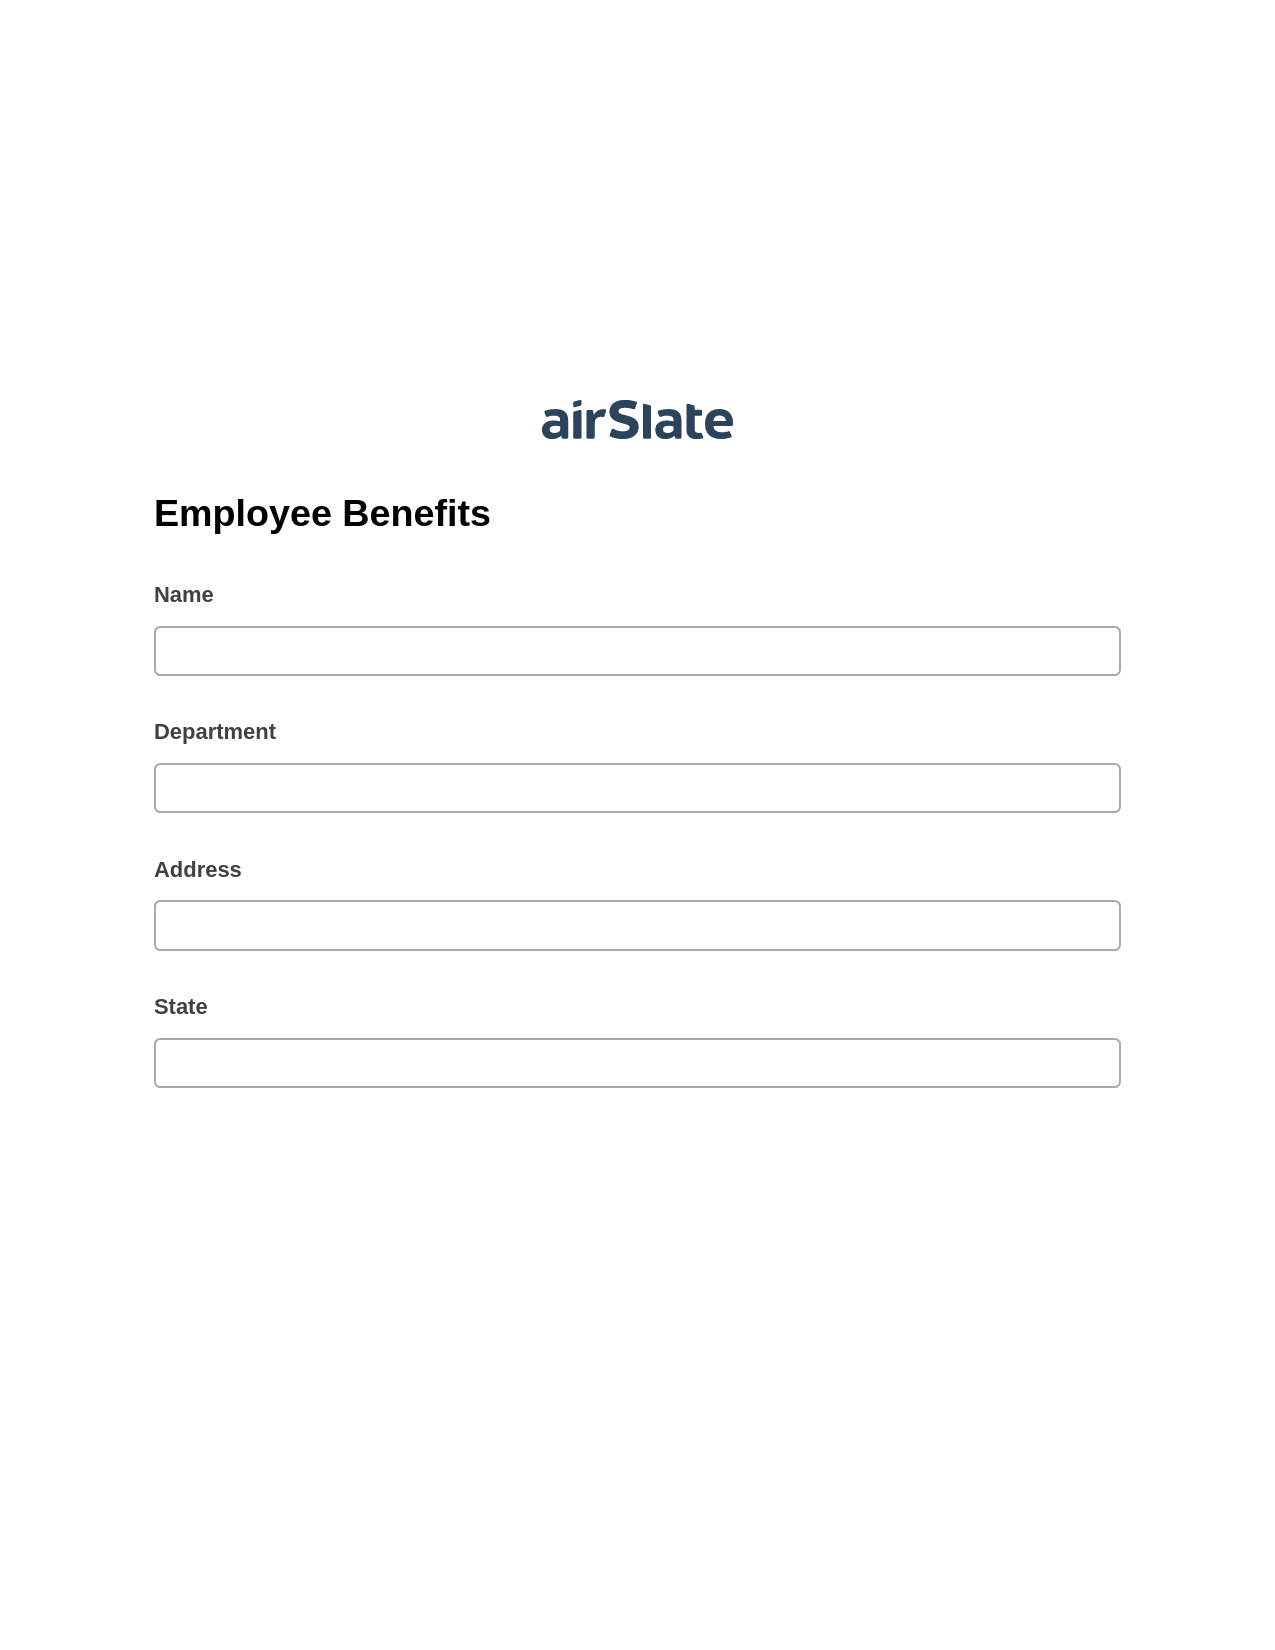 Employee Benefits Pre-fill from Salesforce Records with SOQL Bot, Google Cloud Print Bot, Webhook Postfinish Bot